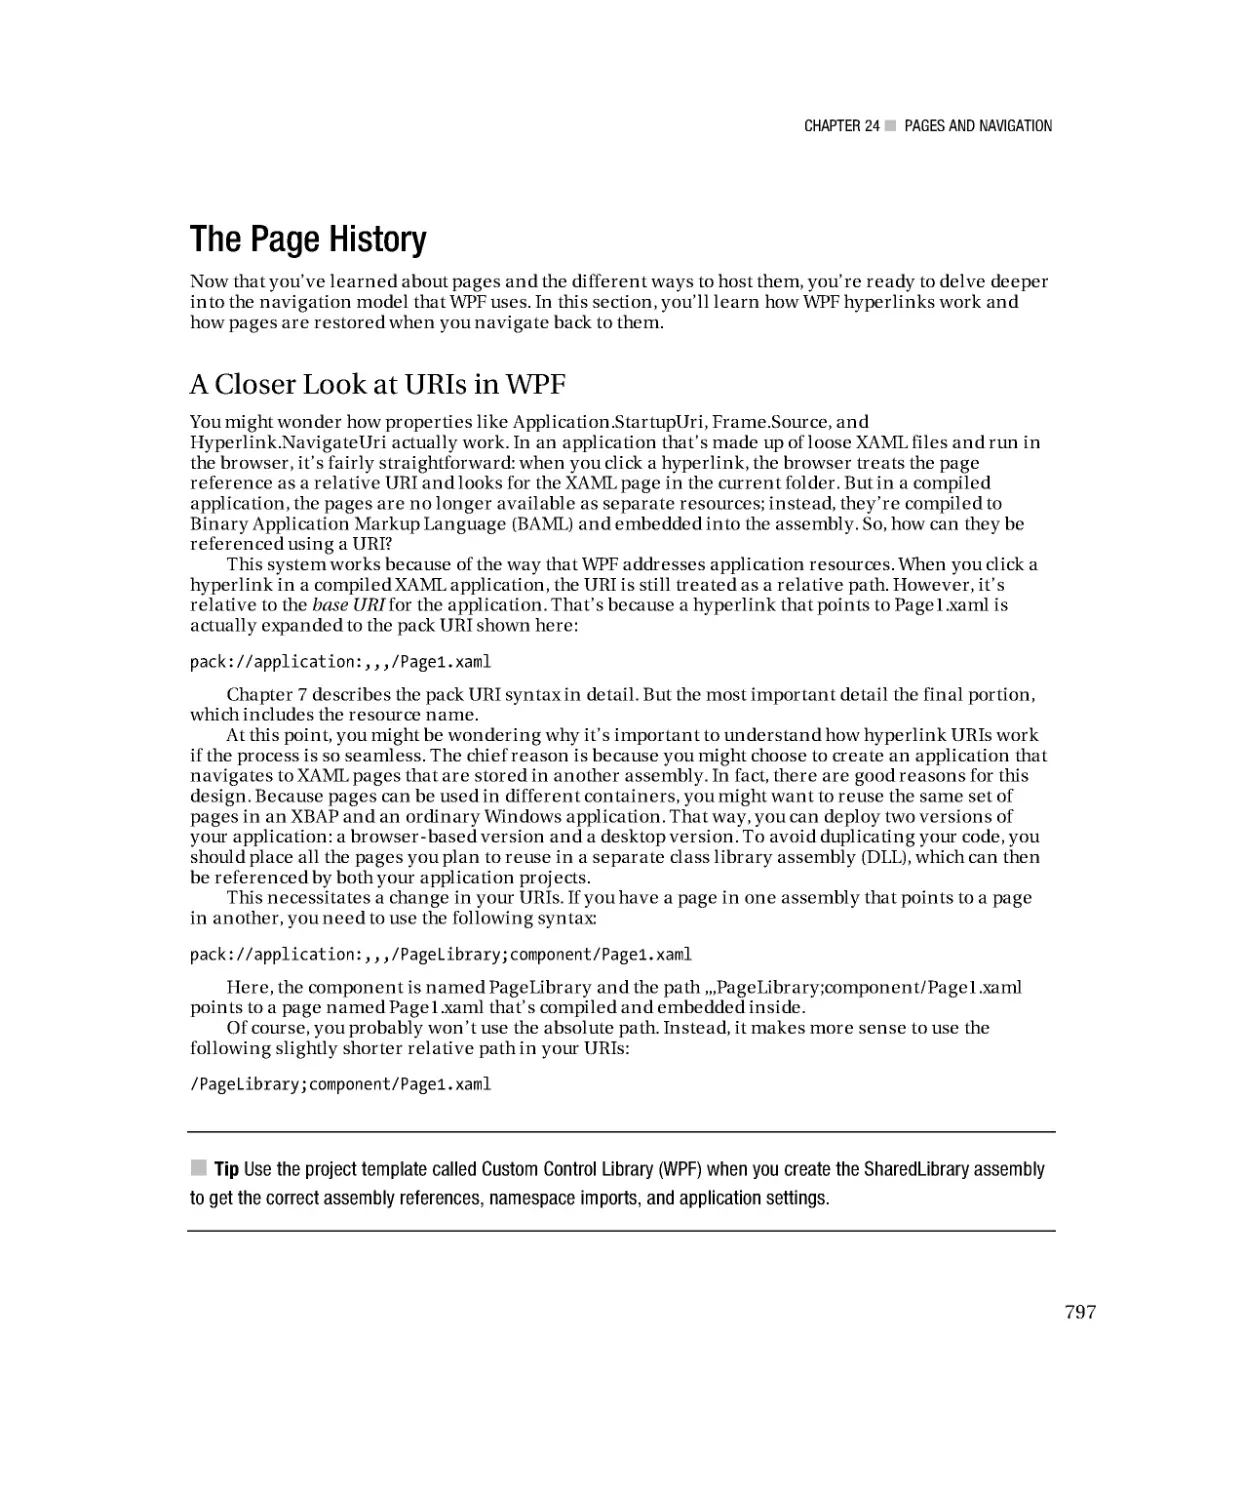 The Page History